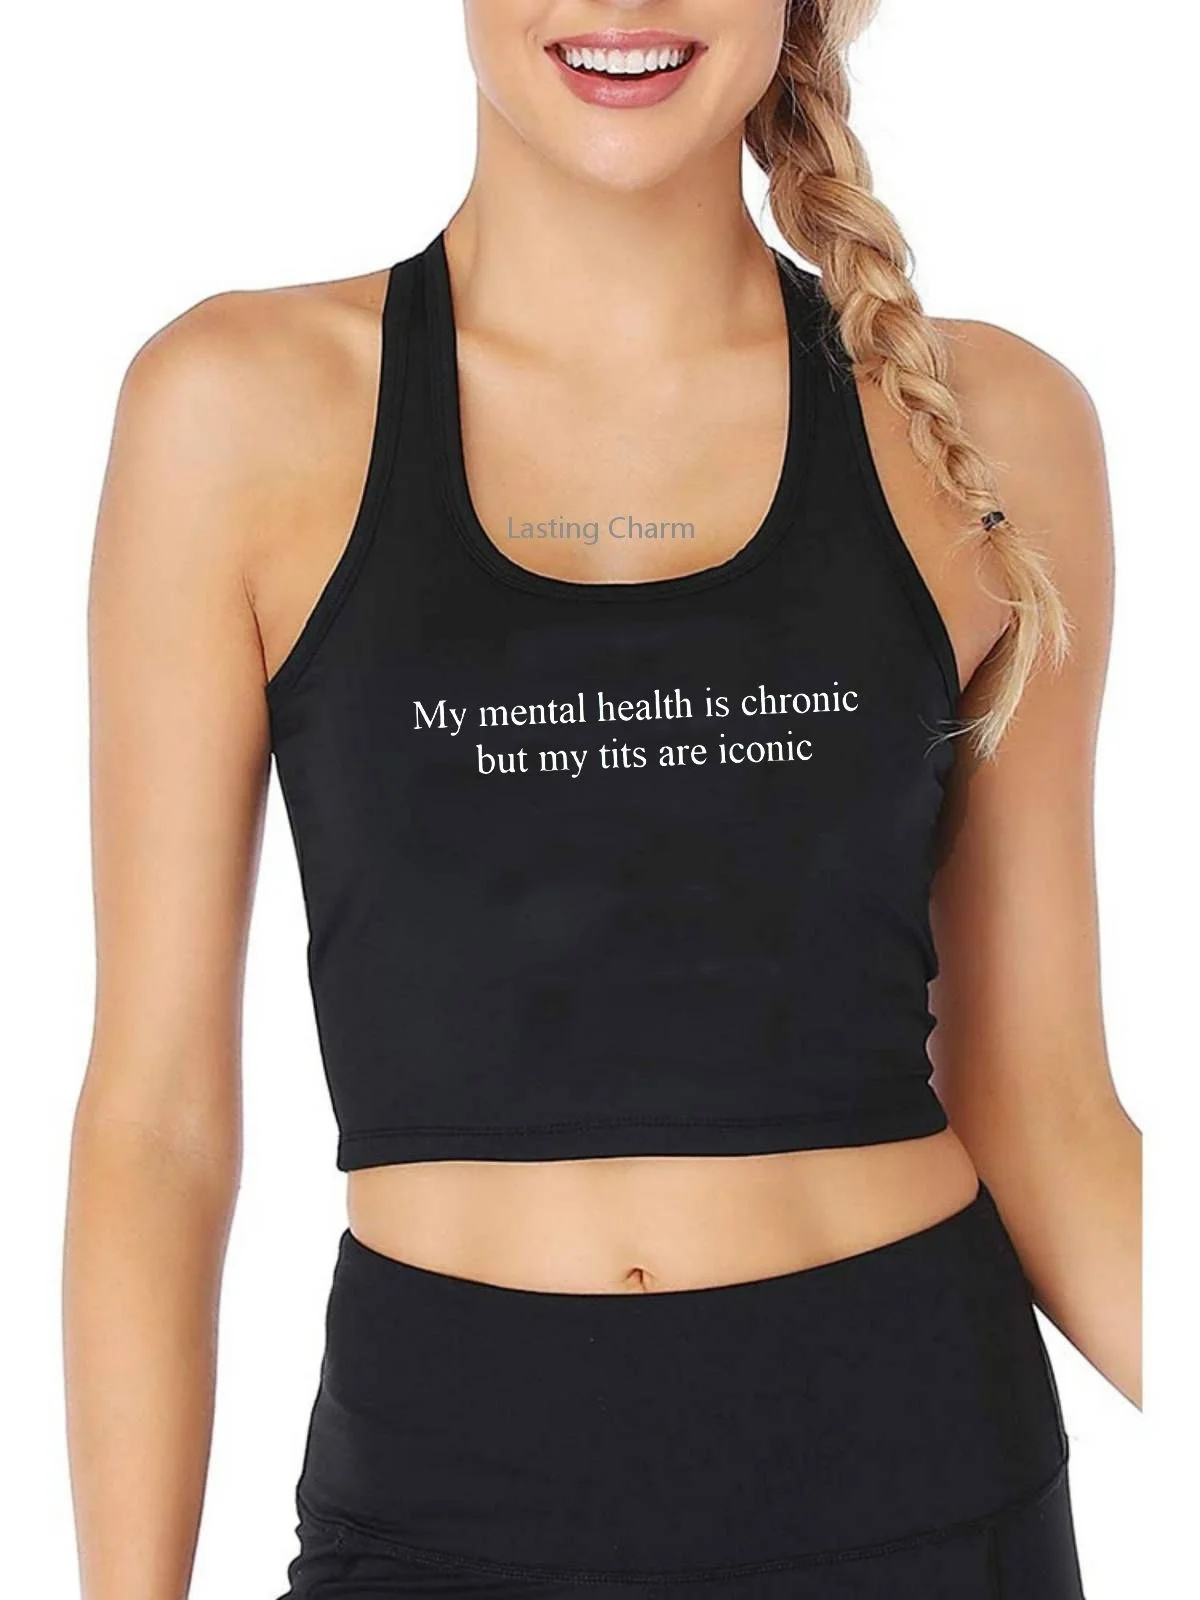 

My mental health is chronic but my tits are iconic Print Tank Top Women's Funny Flirty Graphic Yoga Sports Workout Crop Top